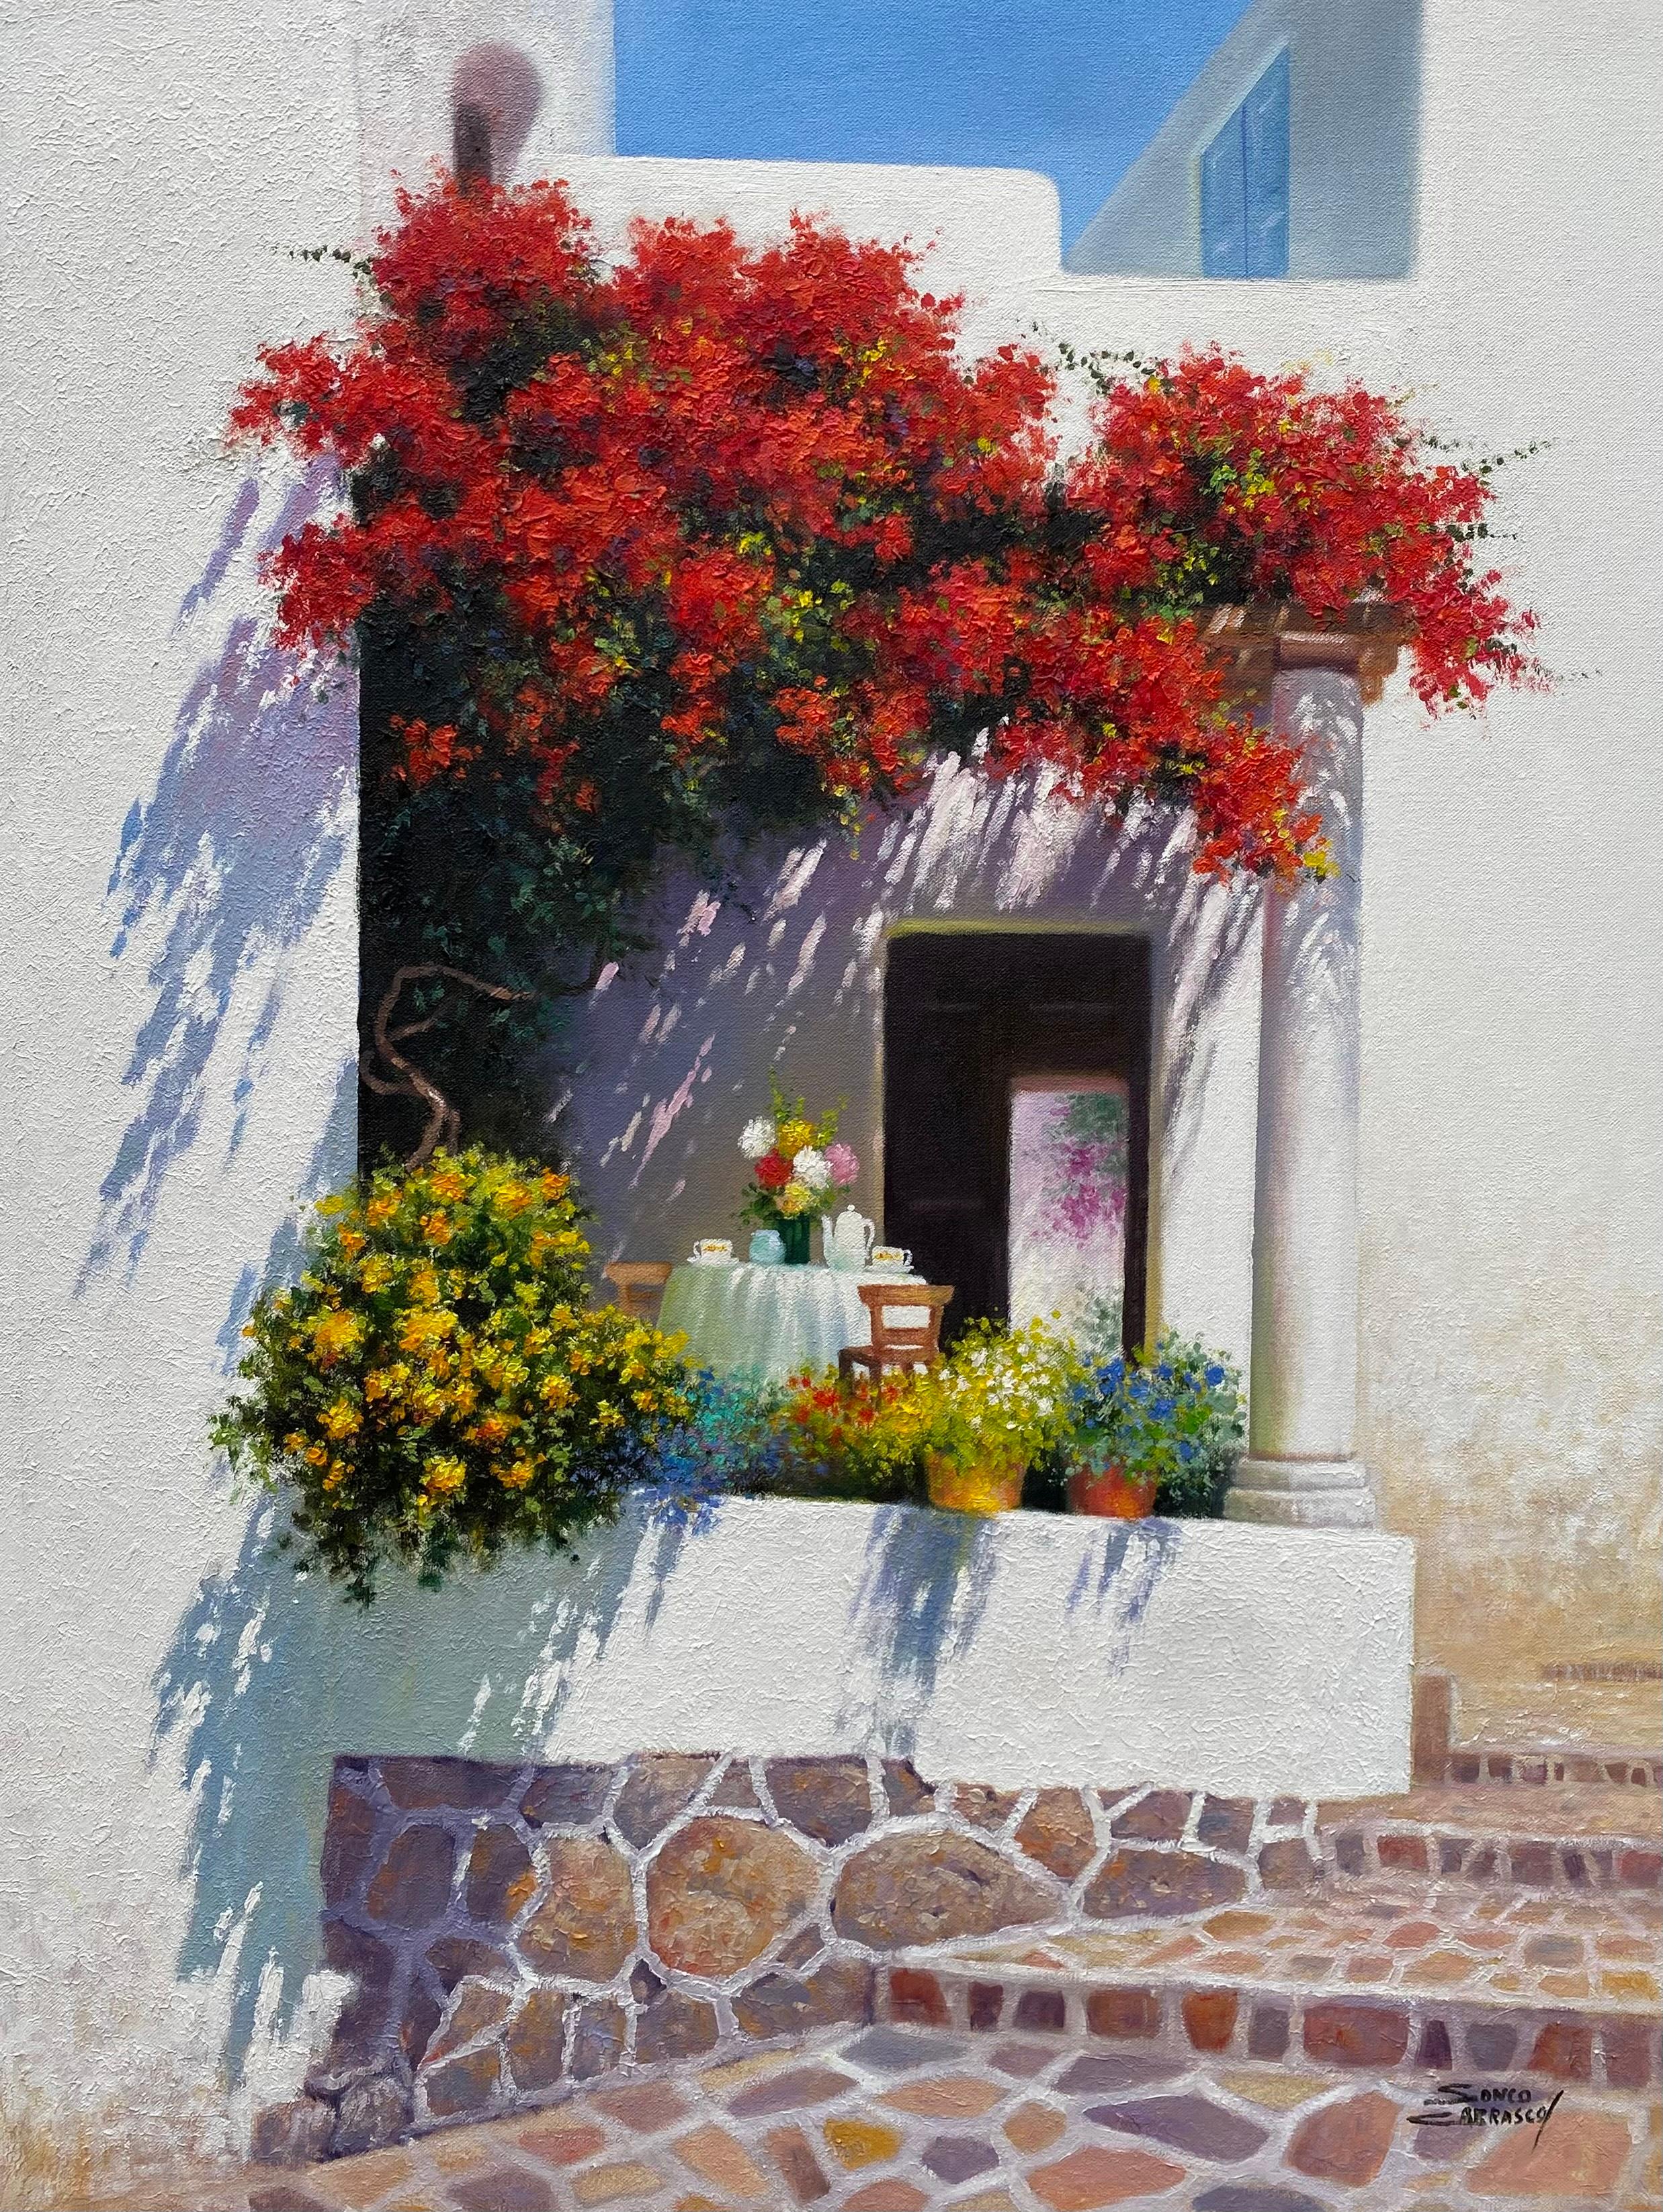 Sunlit Haven-original floral impressionism cityscape painting-contemporary Art - Painting by Sonco Carrasco